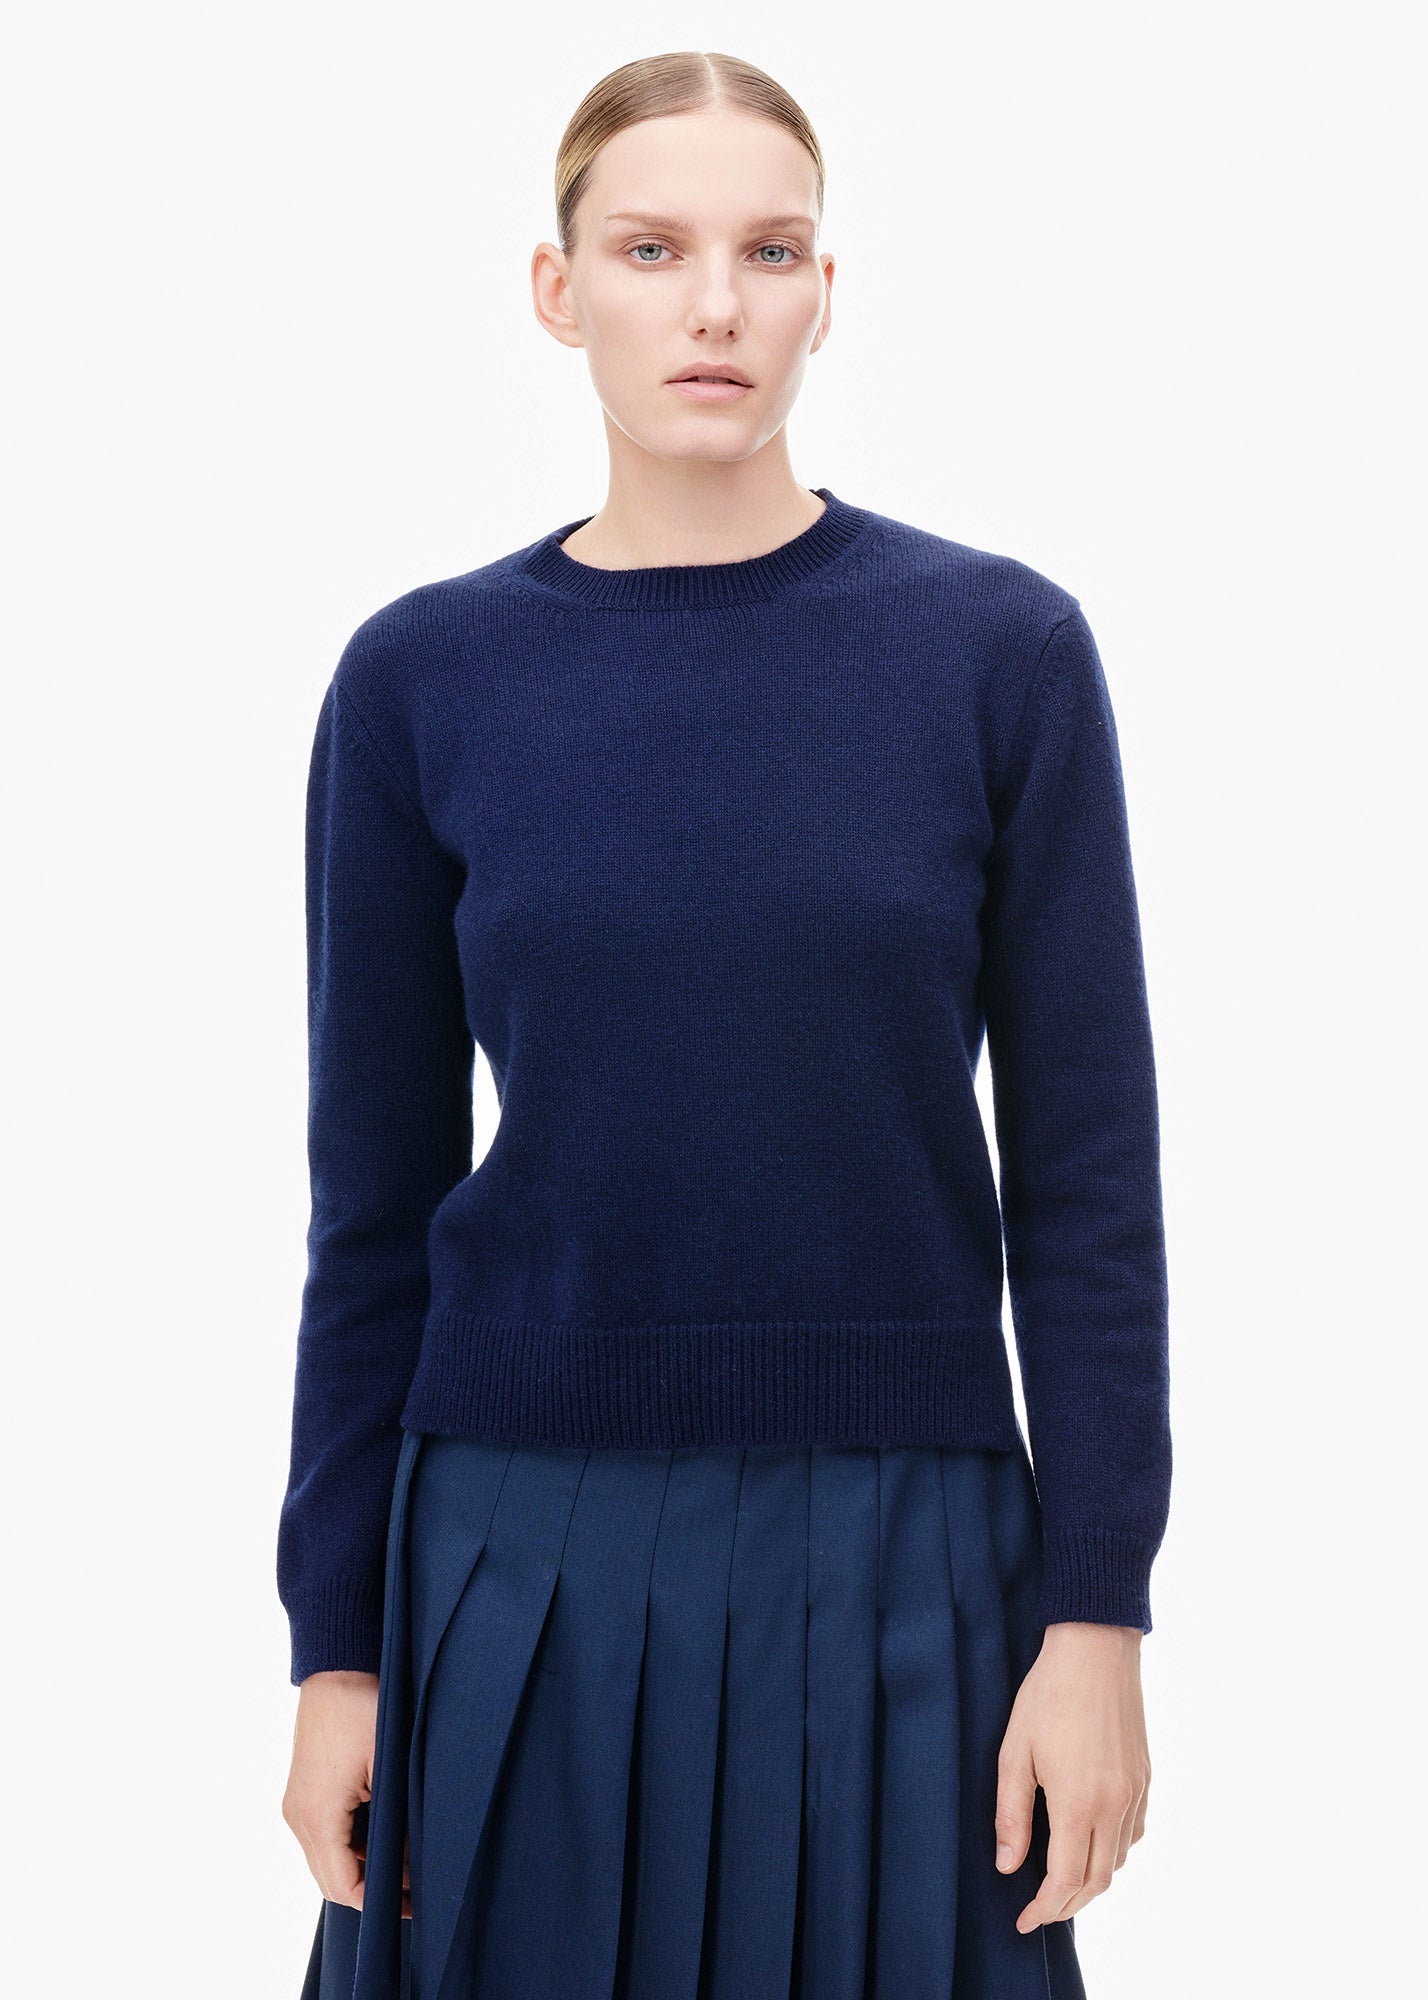 TIINA the STORE Round Neck Cashmere Sweater Navy | Tiina The Store